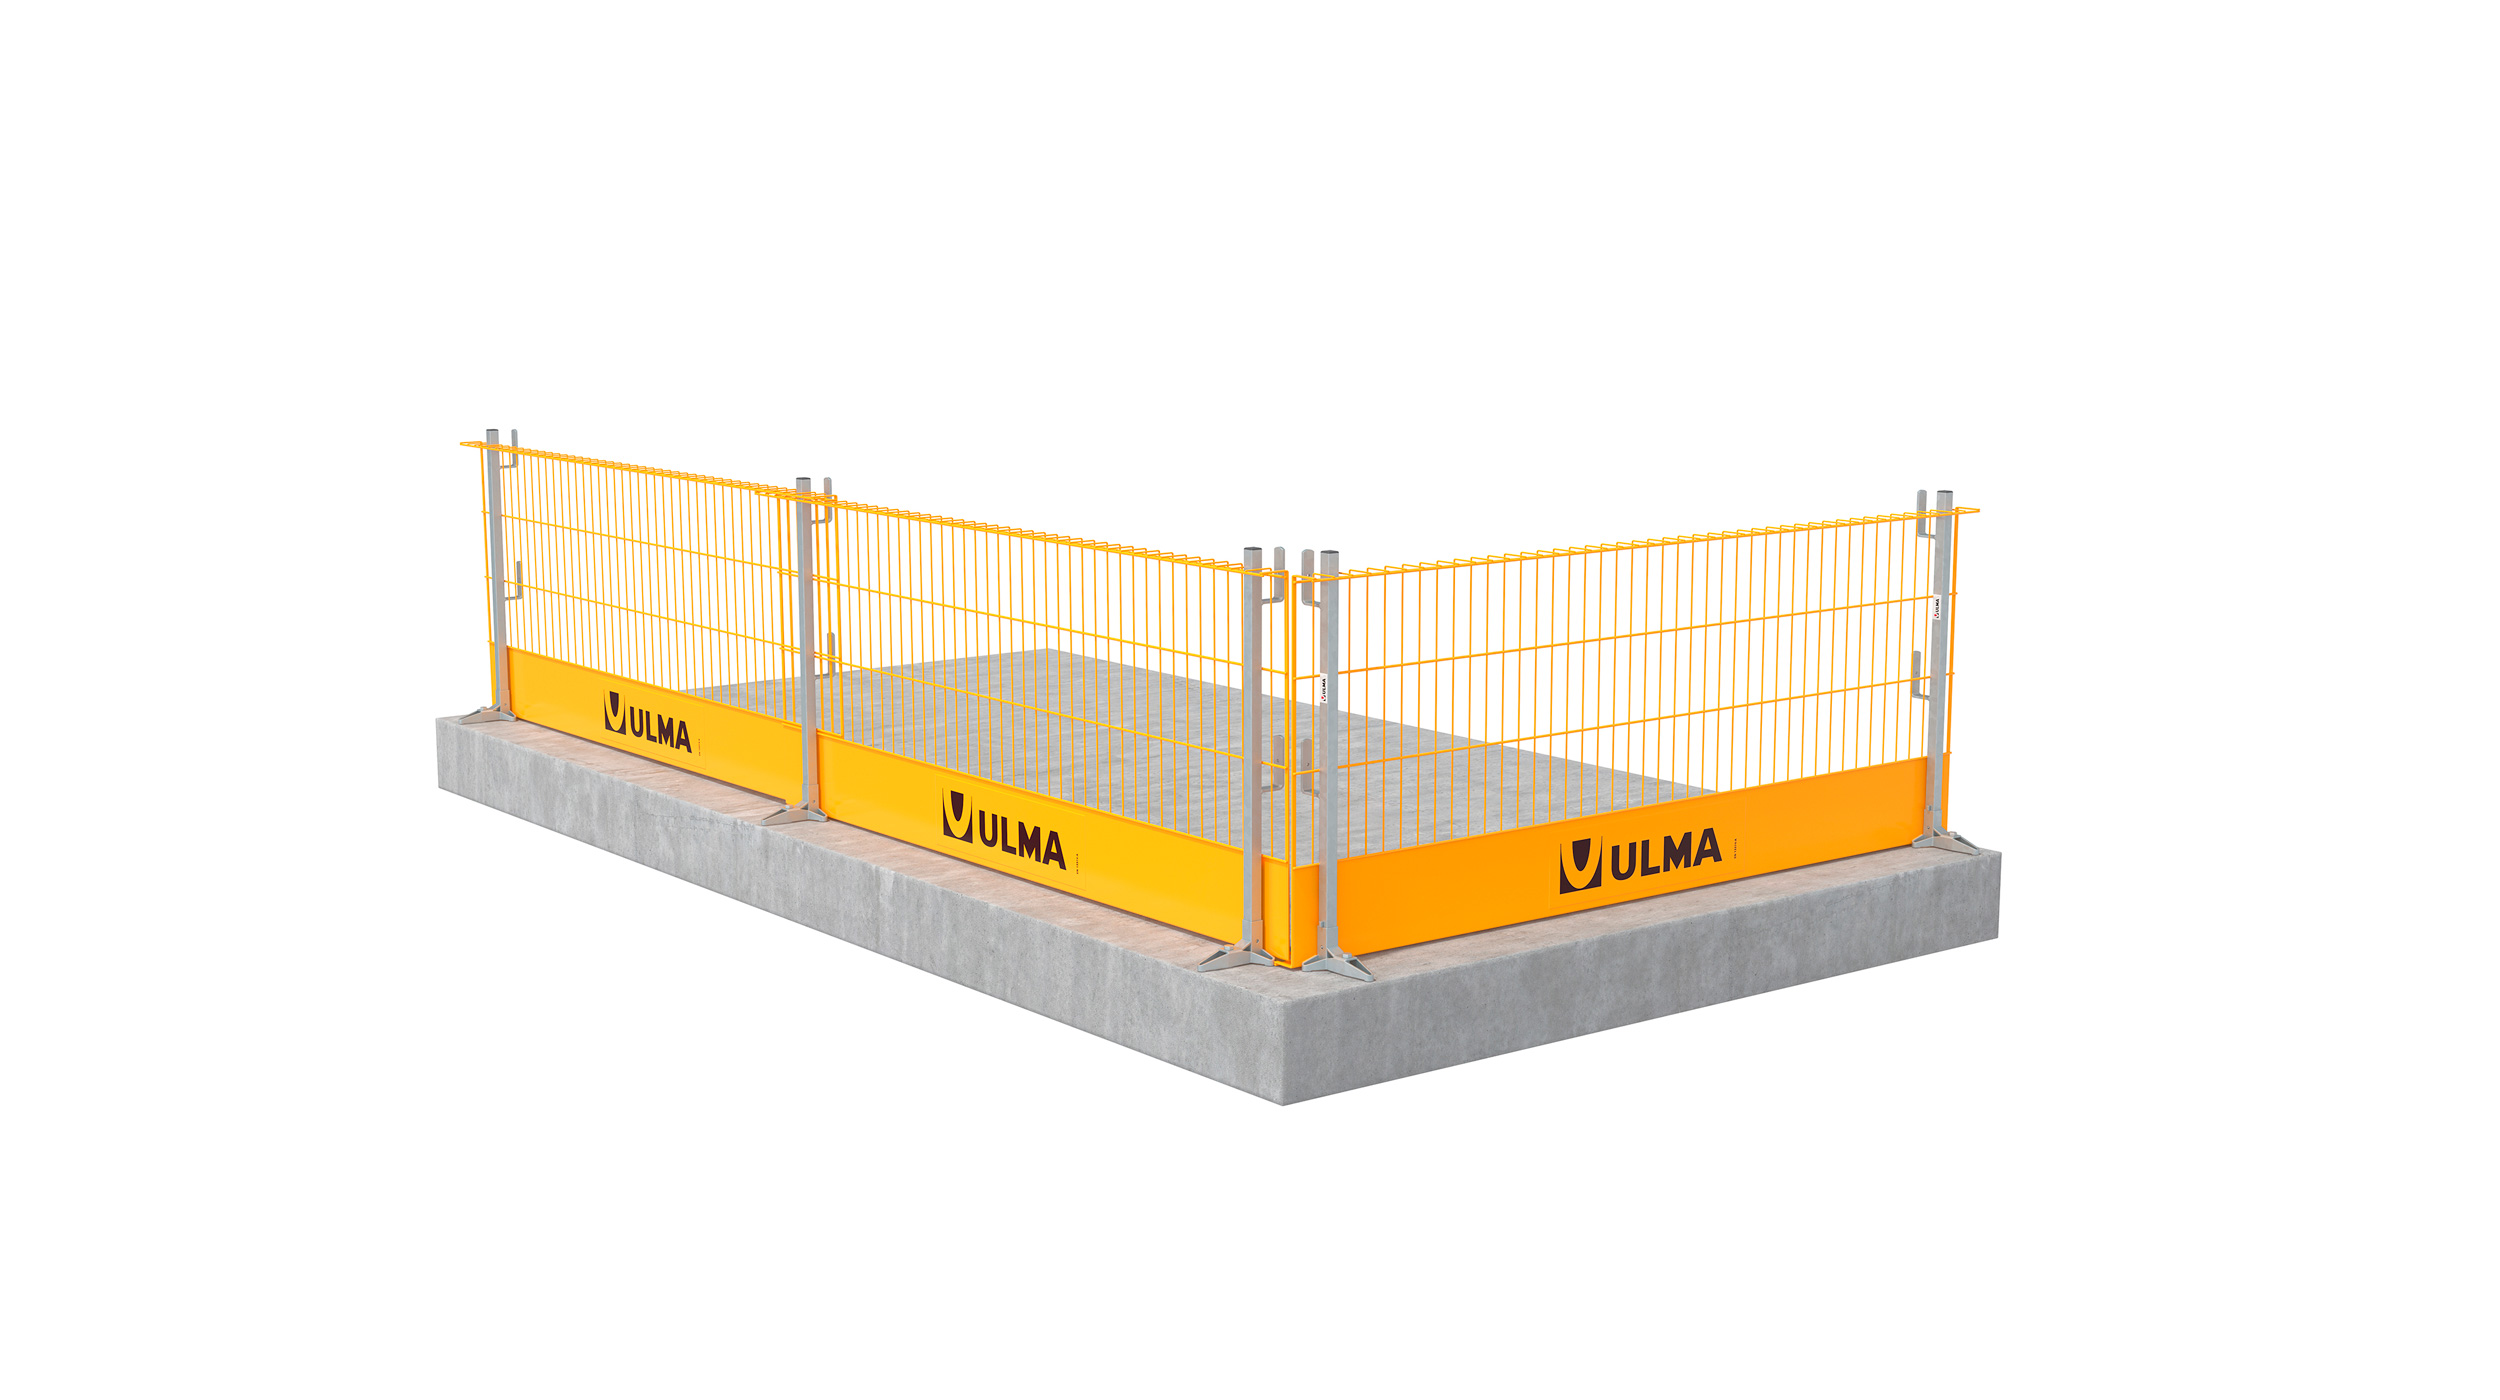 Highly flexible metal edge protection system adaptable to any edge geometry. Designed according to standard EN 13374, specifically intended for concrete structures and ULMA formwork systems.